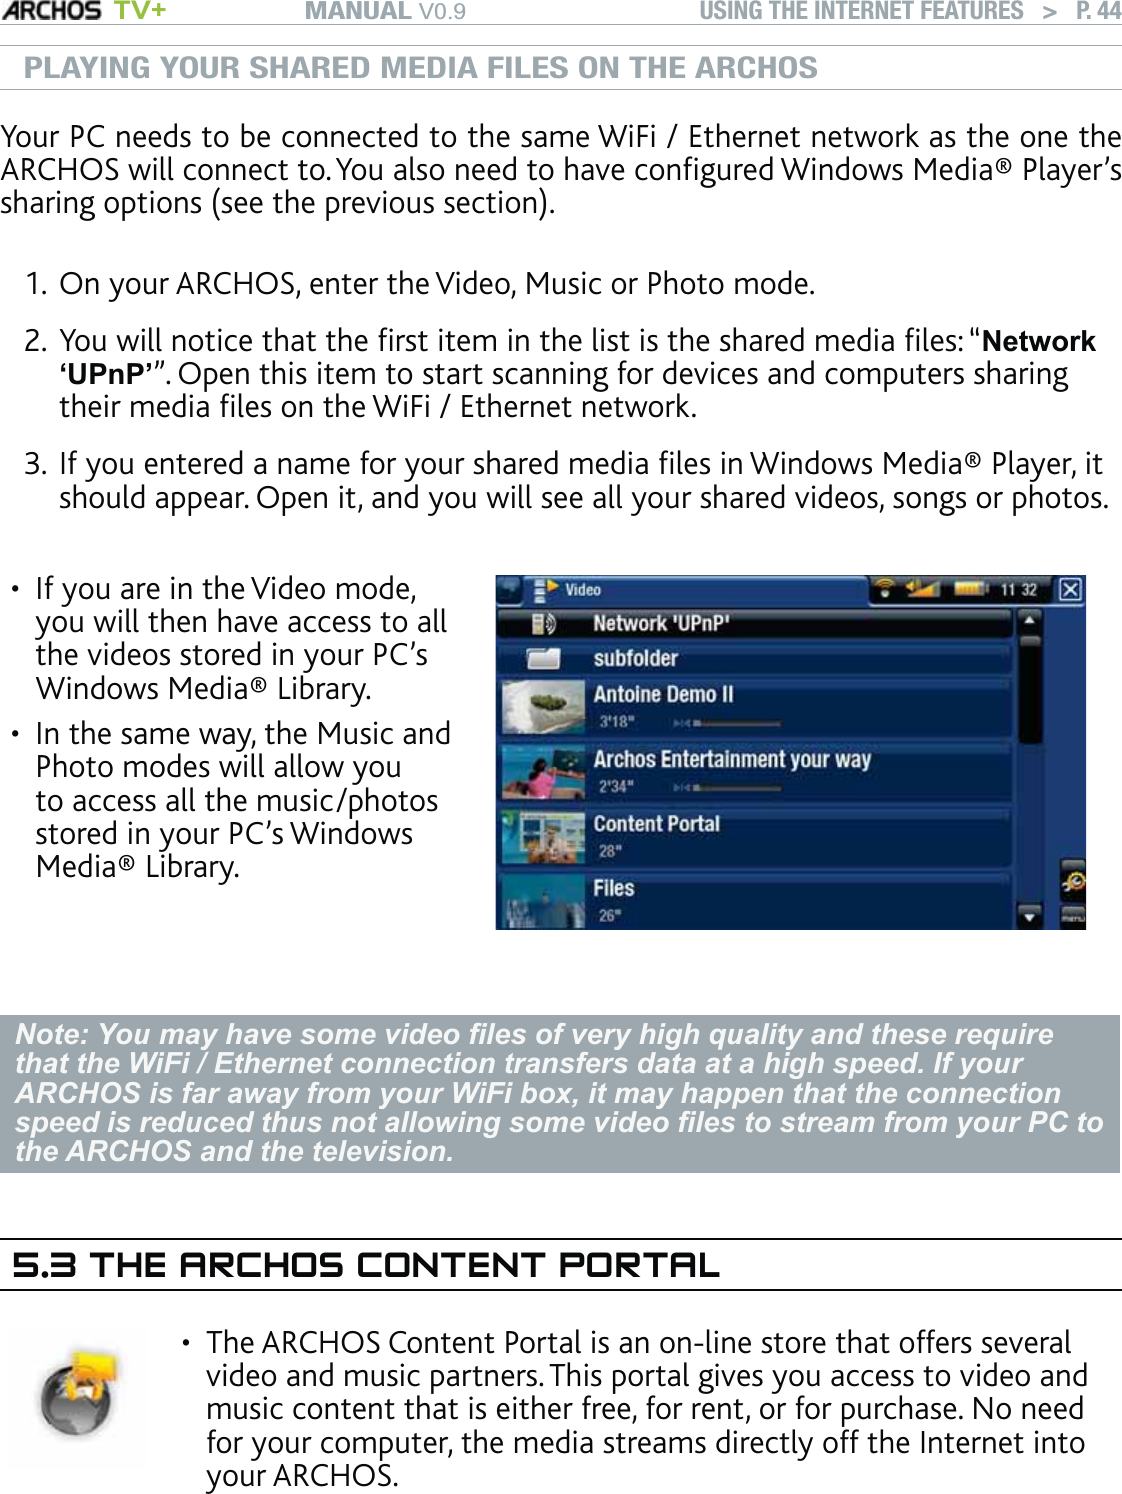 MANUAL V0.9 TV+ USING THE INTERNET FEATURES   &gt;   P. 44PLAYING YOUR SHARED MEDIA FILES ON THE ARCHOSYour PC needs to be connected to the same WiFi / Ethernet network as the one the ARCHOS will connect to. You also need to have conﬁgured Windows Media® Player’s sharing options (see the previous section). On your ARCHOS, enter the Video, Music or Photo mode. You will notice that the ﬁrst item in the list is the shared media ﬁles: “Network ‘UPnP’”. Open this item to start scanning for devices and computers sharing their media ﬁles on the WiFi / Ethernet network. If you entered a name for your shared media ﬁles in Windows Media® Player, it should appear. Open it, and you will see all your shared videos, songs or photos.If you are in the Video mode, you will then have access to all the videos stored in your PC’s Windows Media® Library. In the same way, the Music and Photo modes will allow you to access all the music/photos stored in your PC’s Windows Media® Library.••Note: You may have some video ﬁles of very high quality and these require that the WiFi / Ethernet connection transfers data at a high speed. If your ARCHOS is far away from your WiFi box, it may happen that the connection speed is reduced thus not allowing some video ﬁles to stream from your PC to the ARCHOS and the television.5.3 THE ARCHOS CONTENT PORTALThe ARCHOS Content Portal is an on-line store that offers several video and music partners. This portal gives you access to video and music content that is either free, for rent, or for purchase. No need for your computer, the media streams directly off the Internet into your ARCHOS.  •1.2.3.